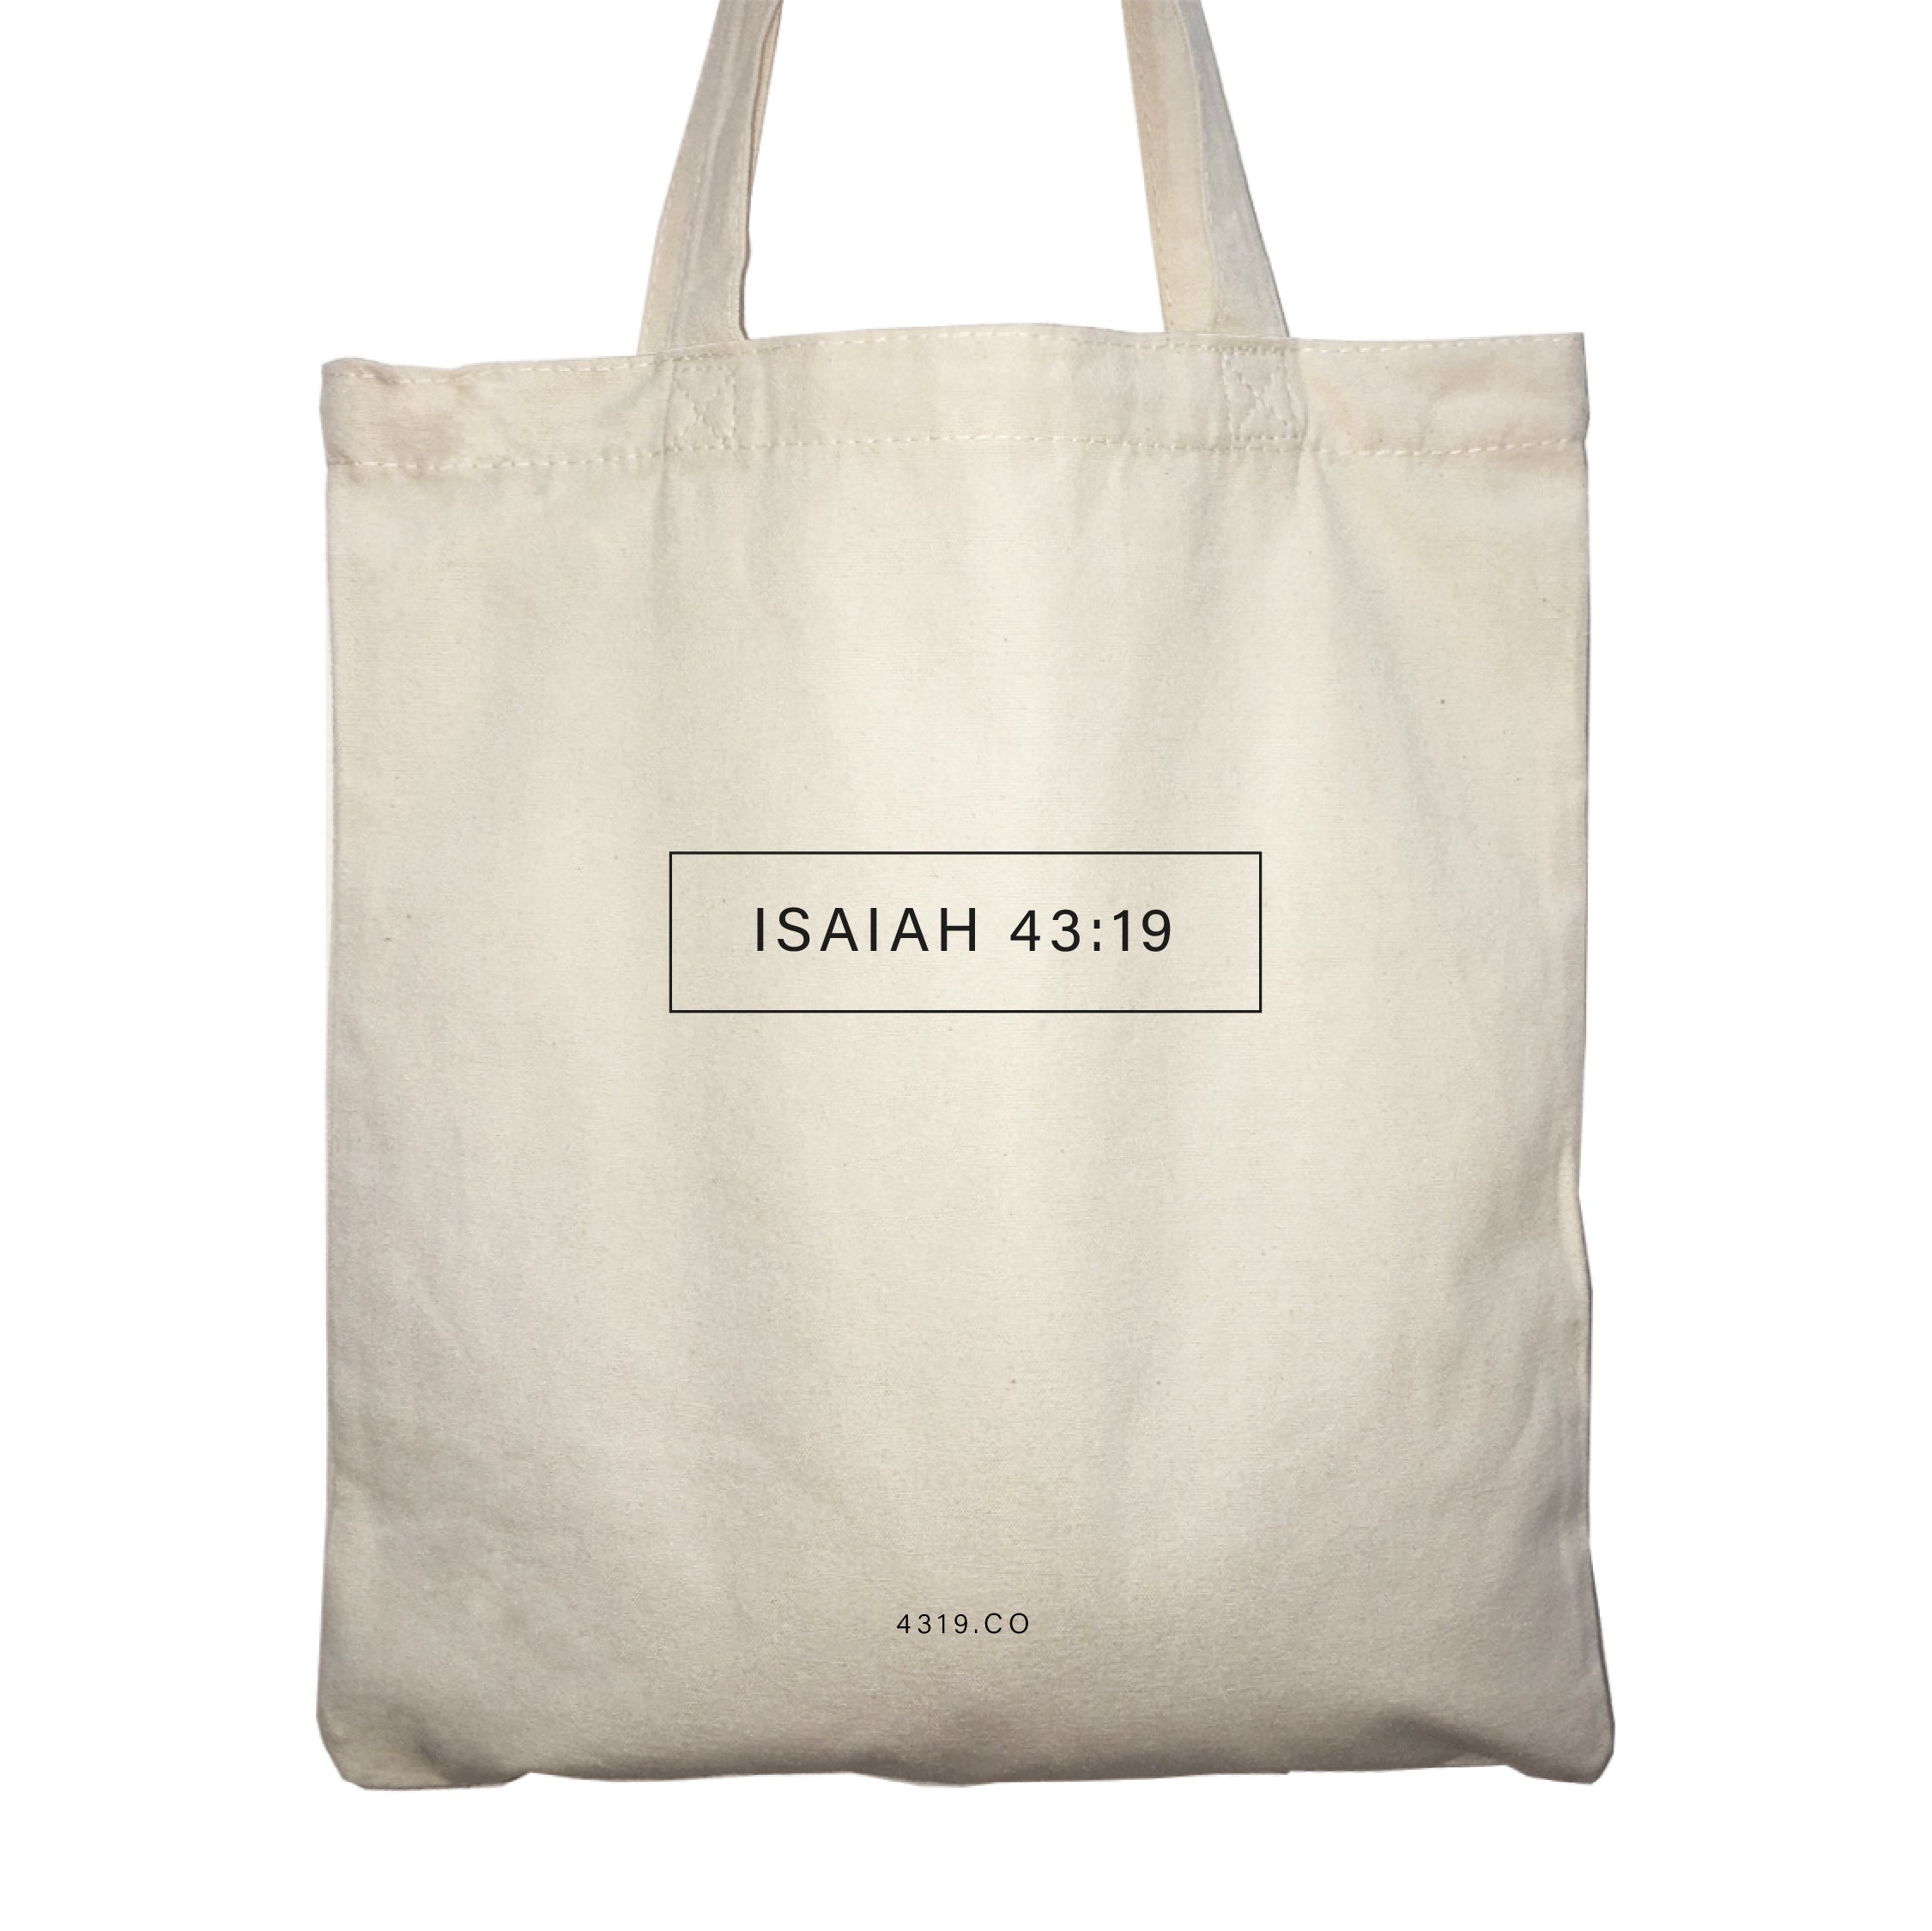 Isaiah 43:19 Christian Bible Verse Tote Bag | A Gift that Represents New Beginnings | 4319.CO Christian Gift Shop Singapore